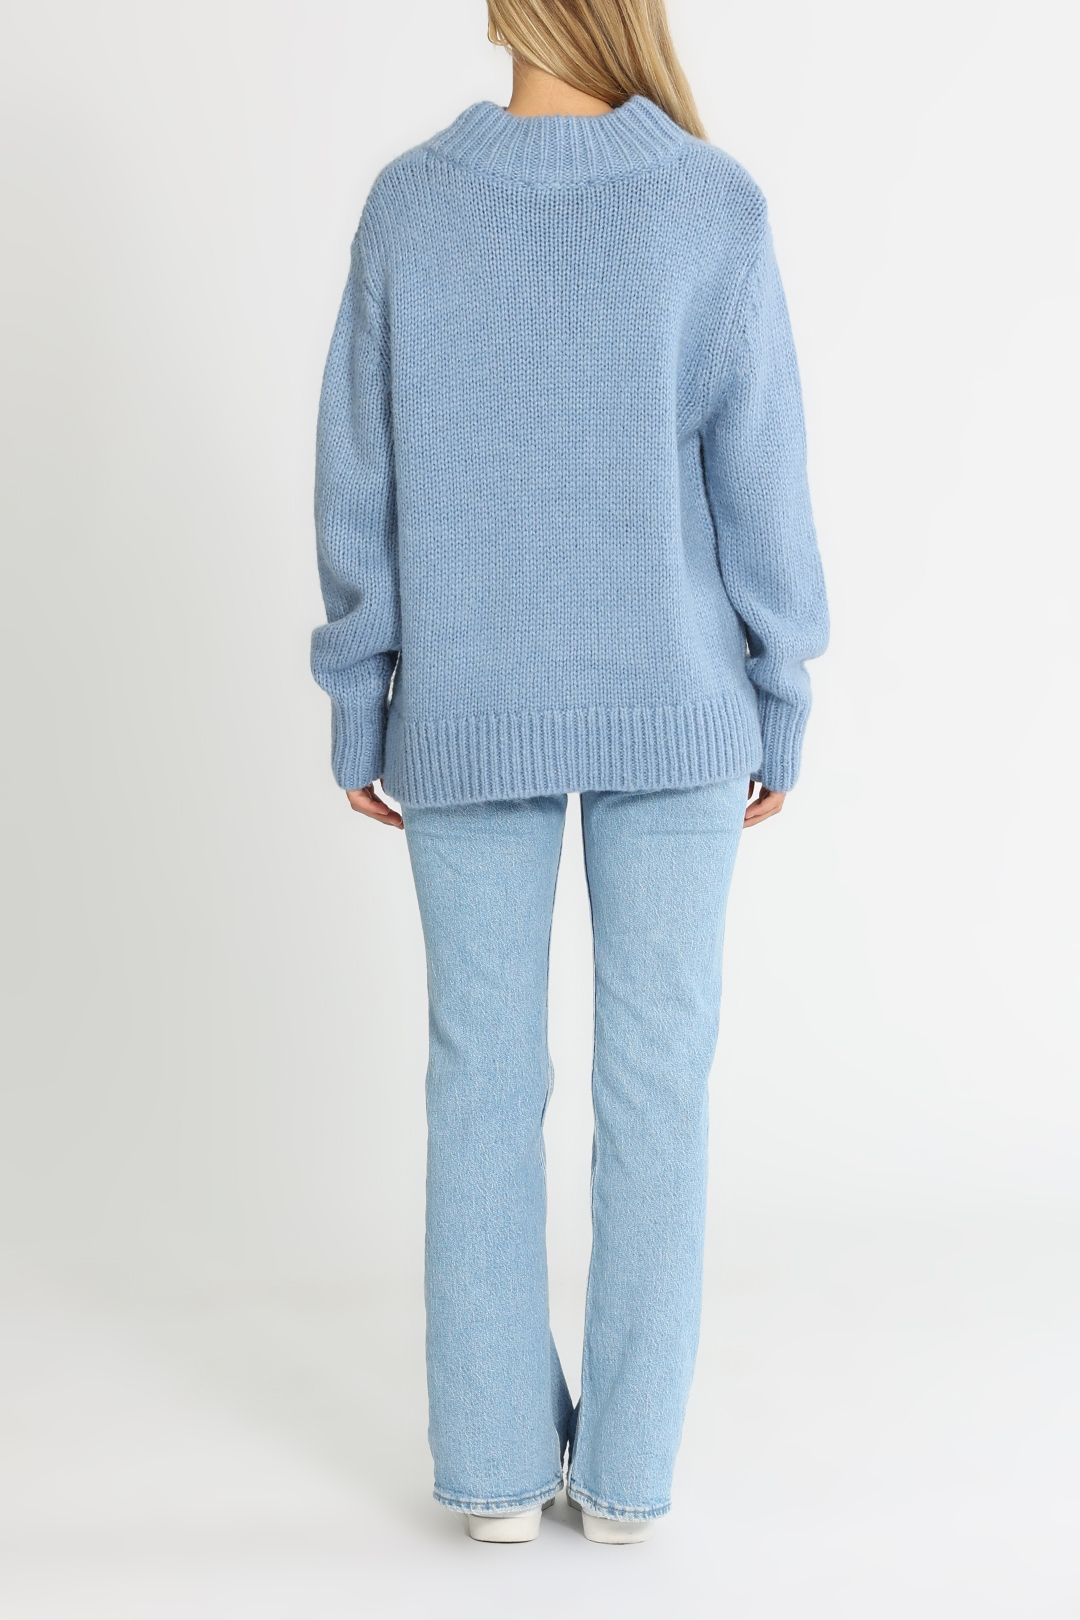 Bec and Bridge Romana Knit Jumper Sky Relaxed Fit